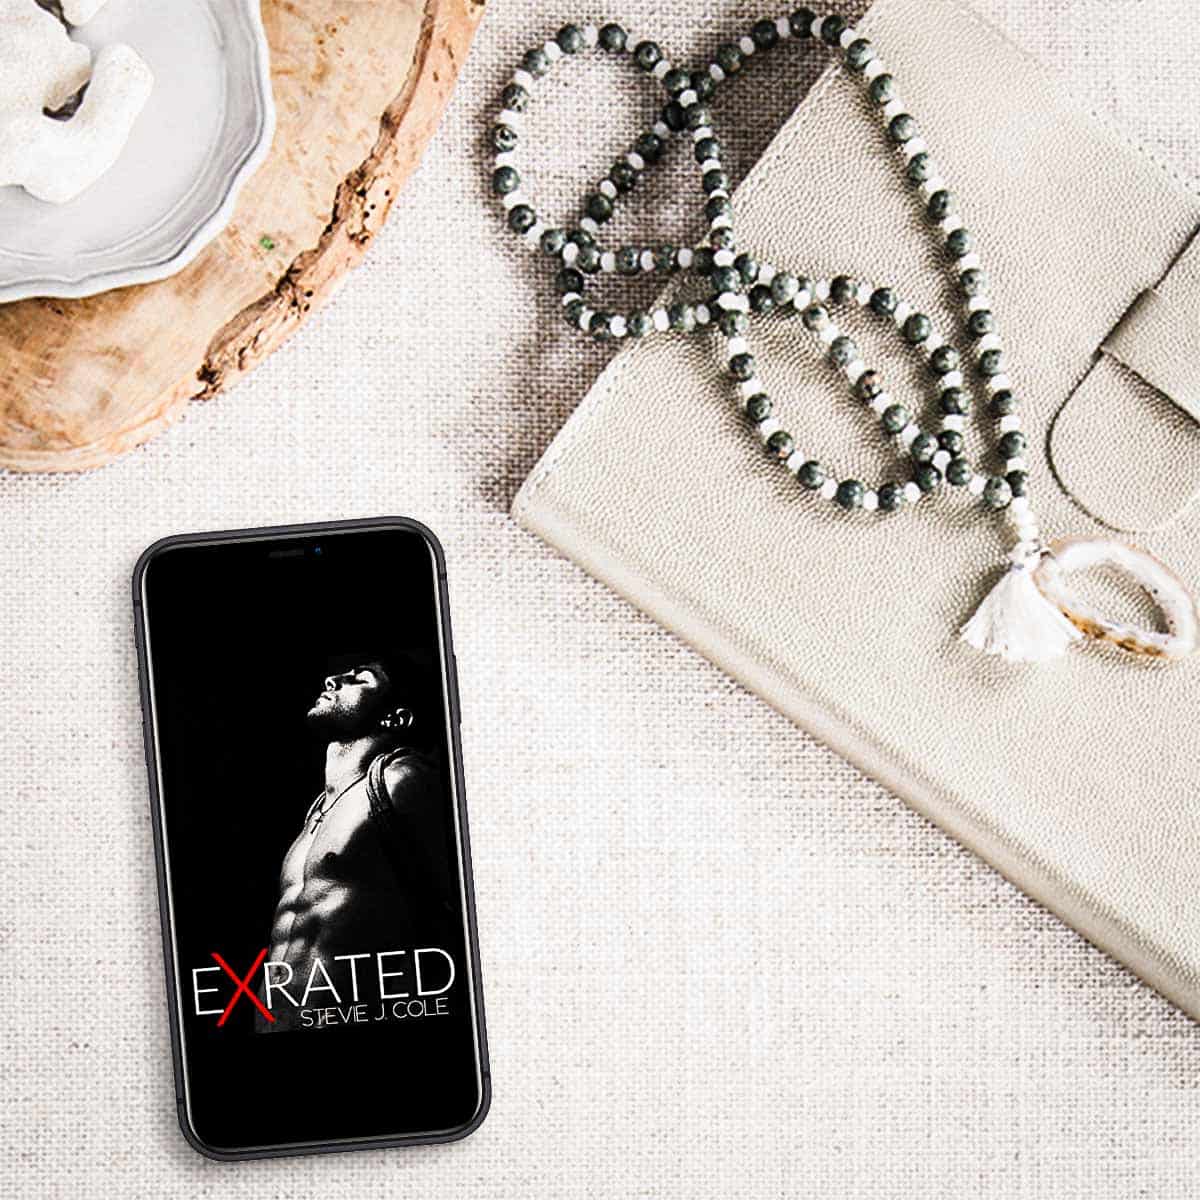 Exrated by Stevie J Cole – A Very NSFW Excerpt!